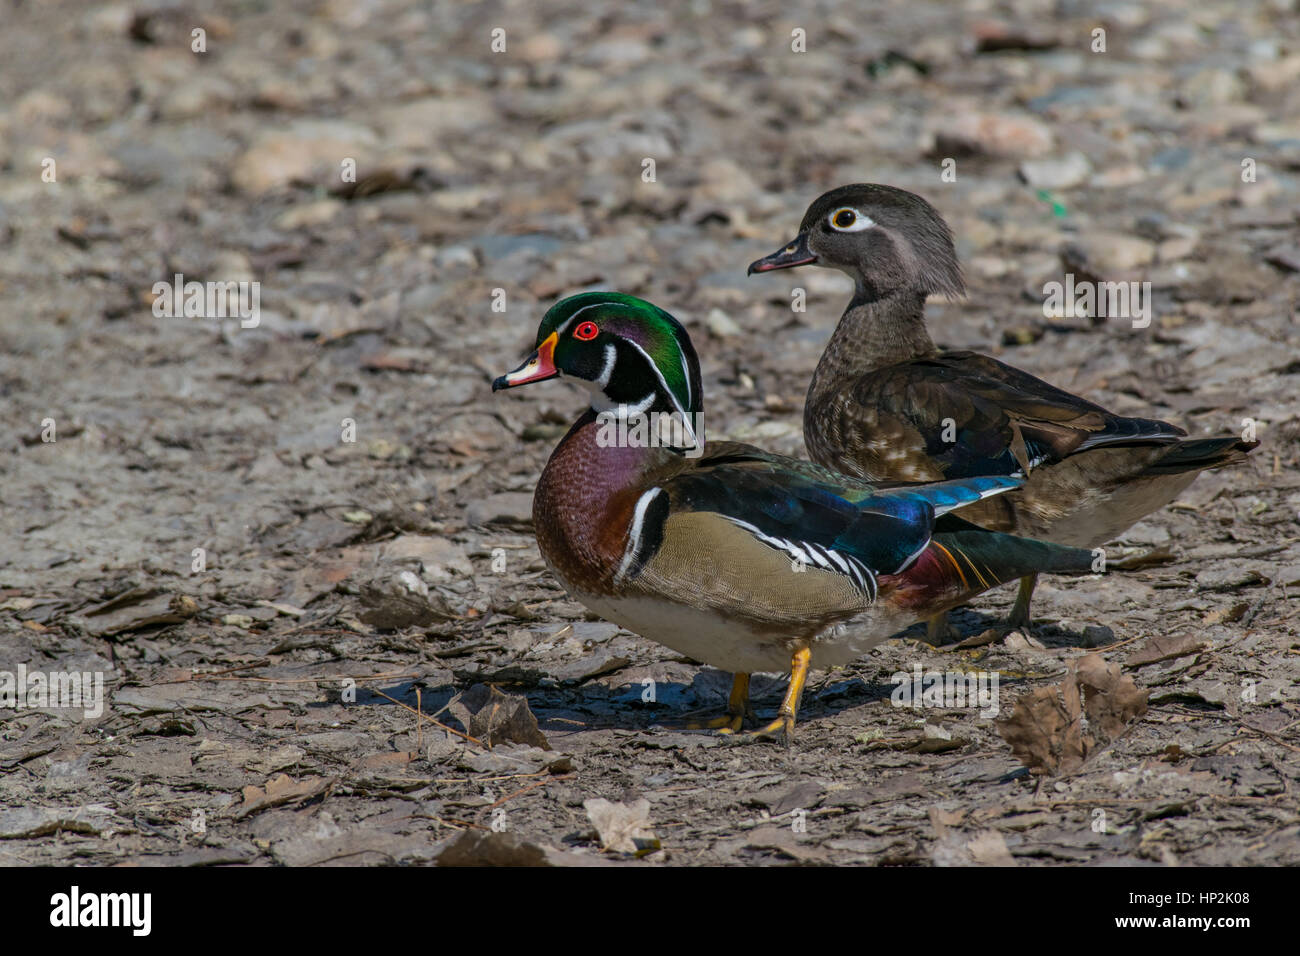 A Beautiful Wood Duck Pair At Lake Shore in Spring Stock Photo